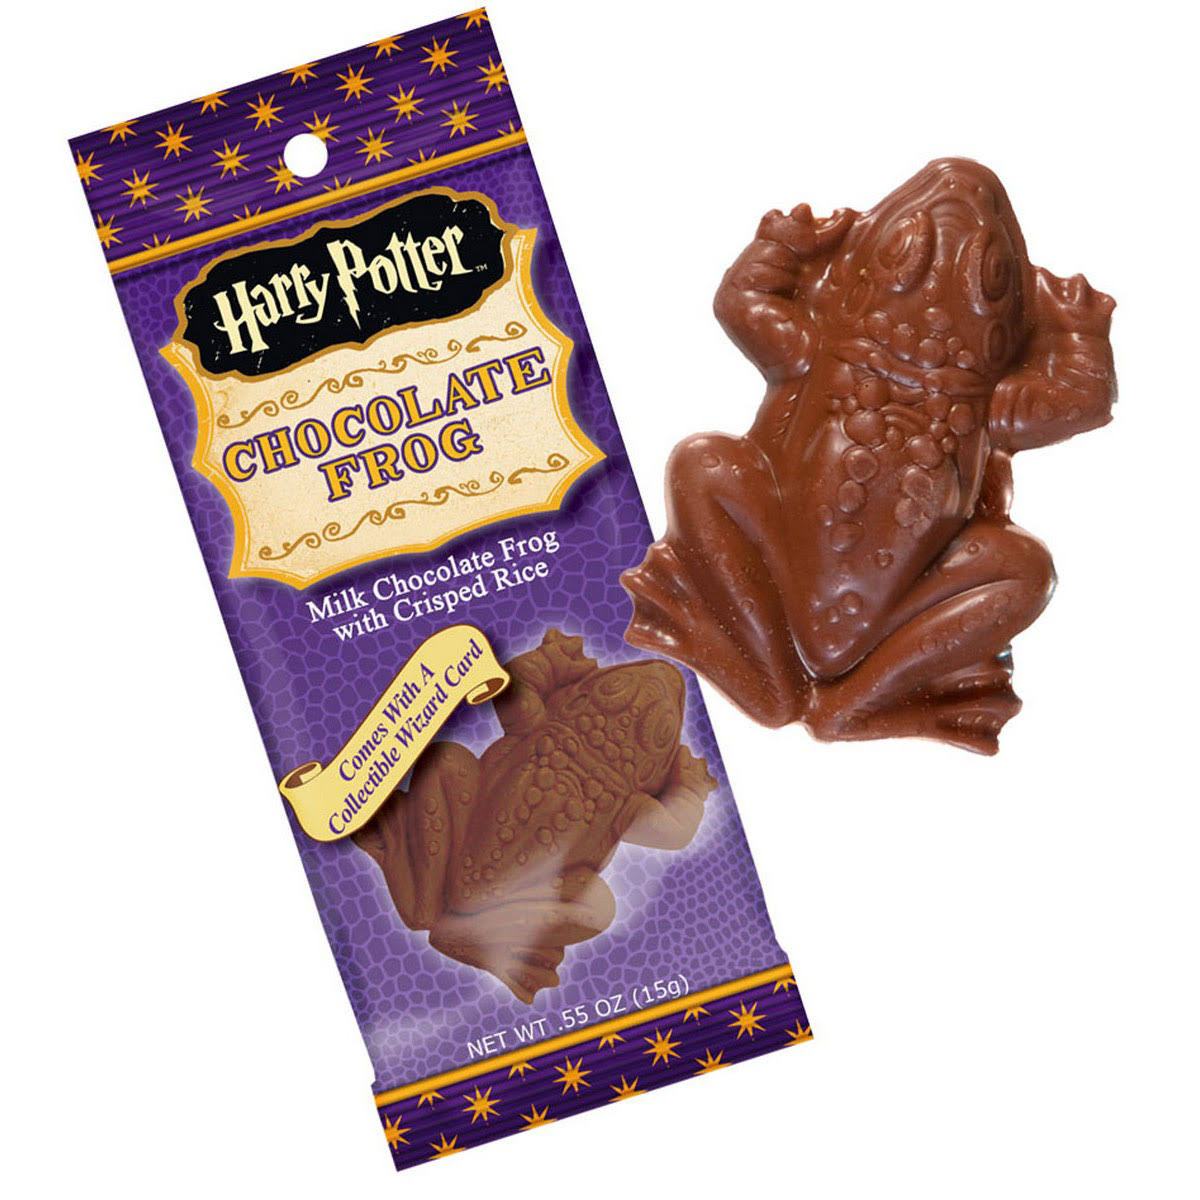 Harry Potter Milk Chocolate Frog with Crisped Rice